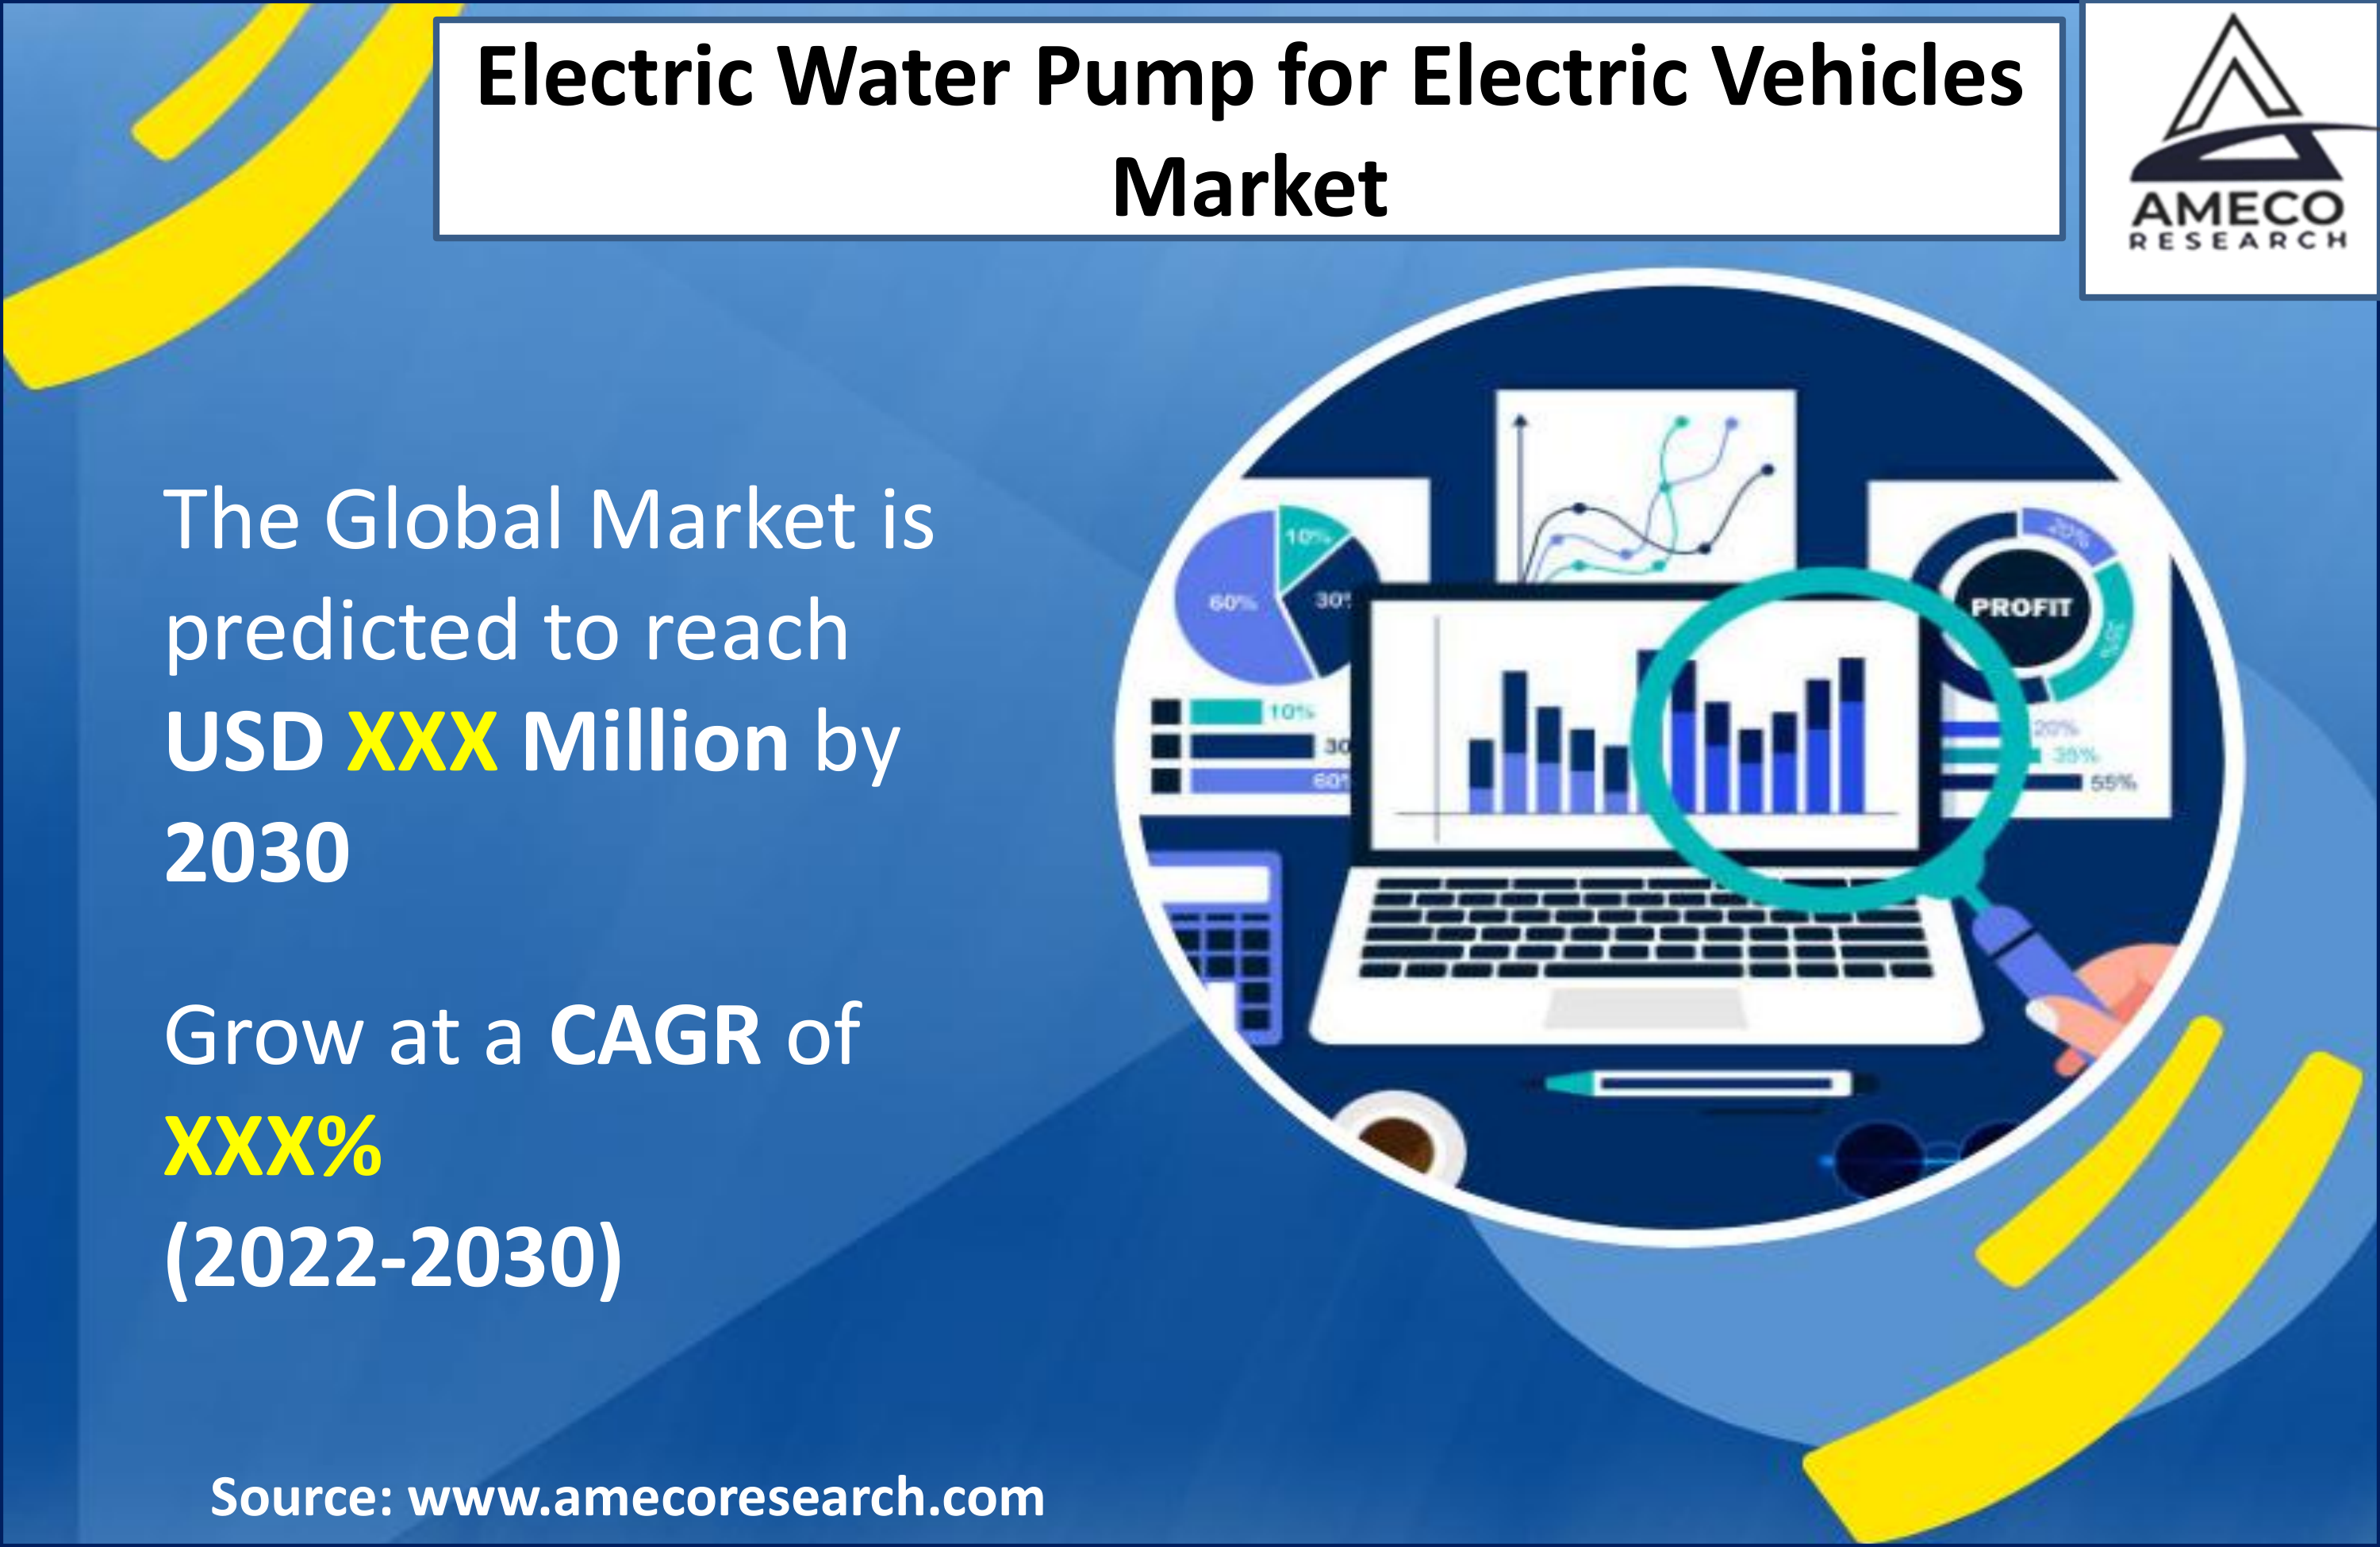 Electric Water Pump for Electric Vehicles Market